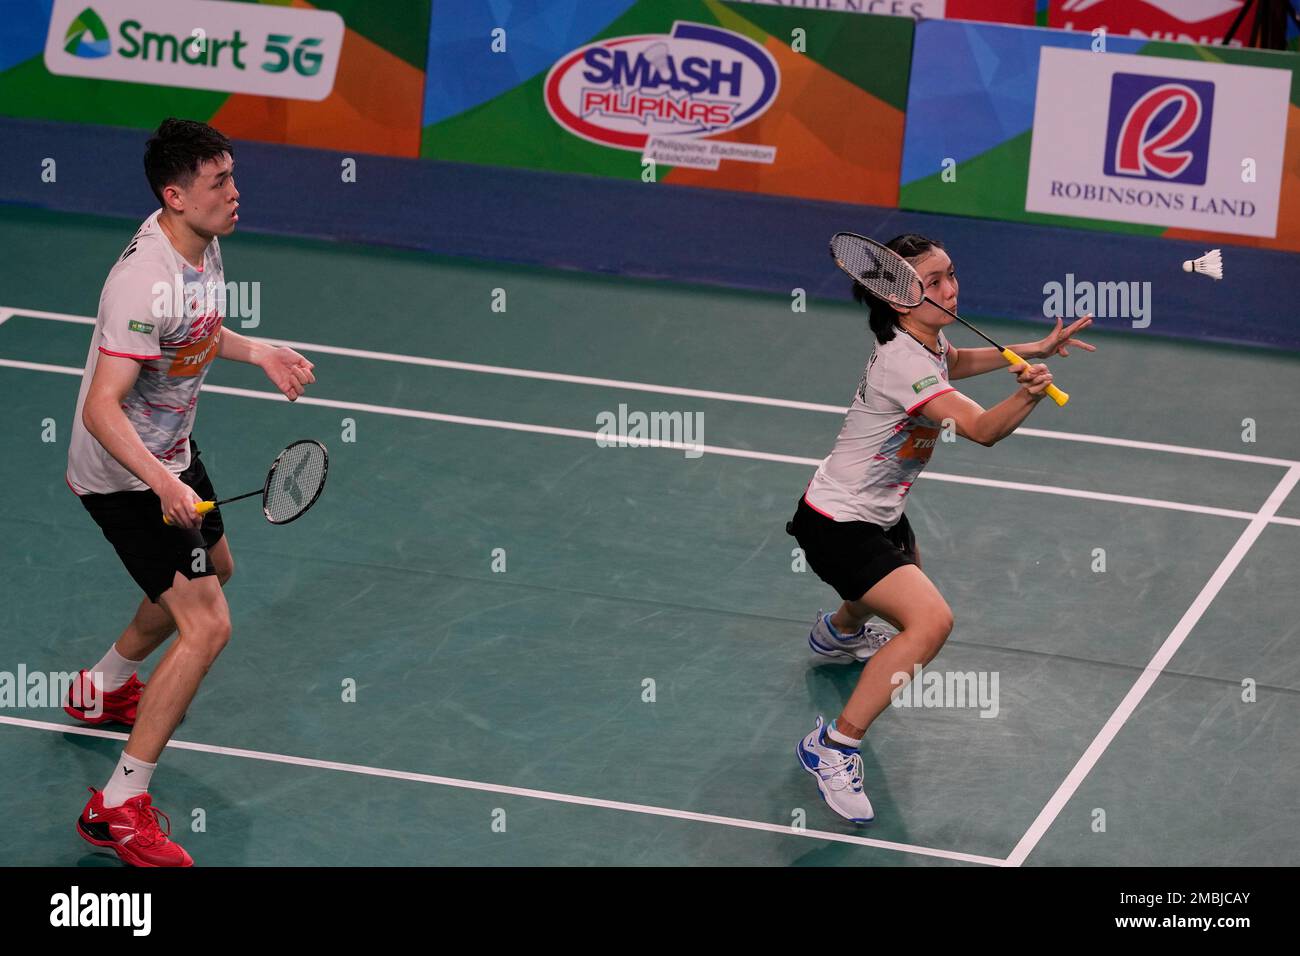 Malaysias Pei Jing Lai, right, and Kian Meng Tan compete against Japans Arisa Higashino and Yuta Watanabe during their mixed doubles quarterfinals match at the Badminton Asia Championships 2022 at Muntinlupa, Philippines